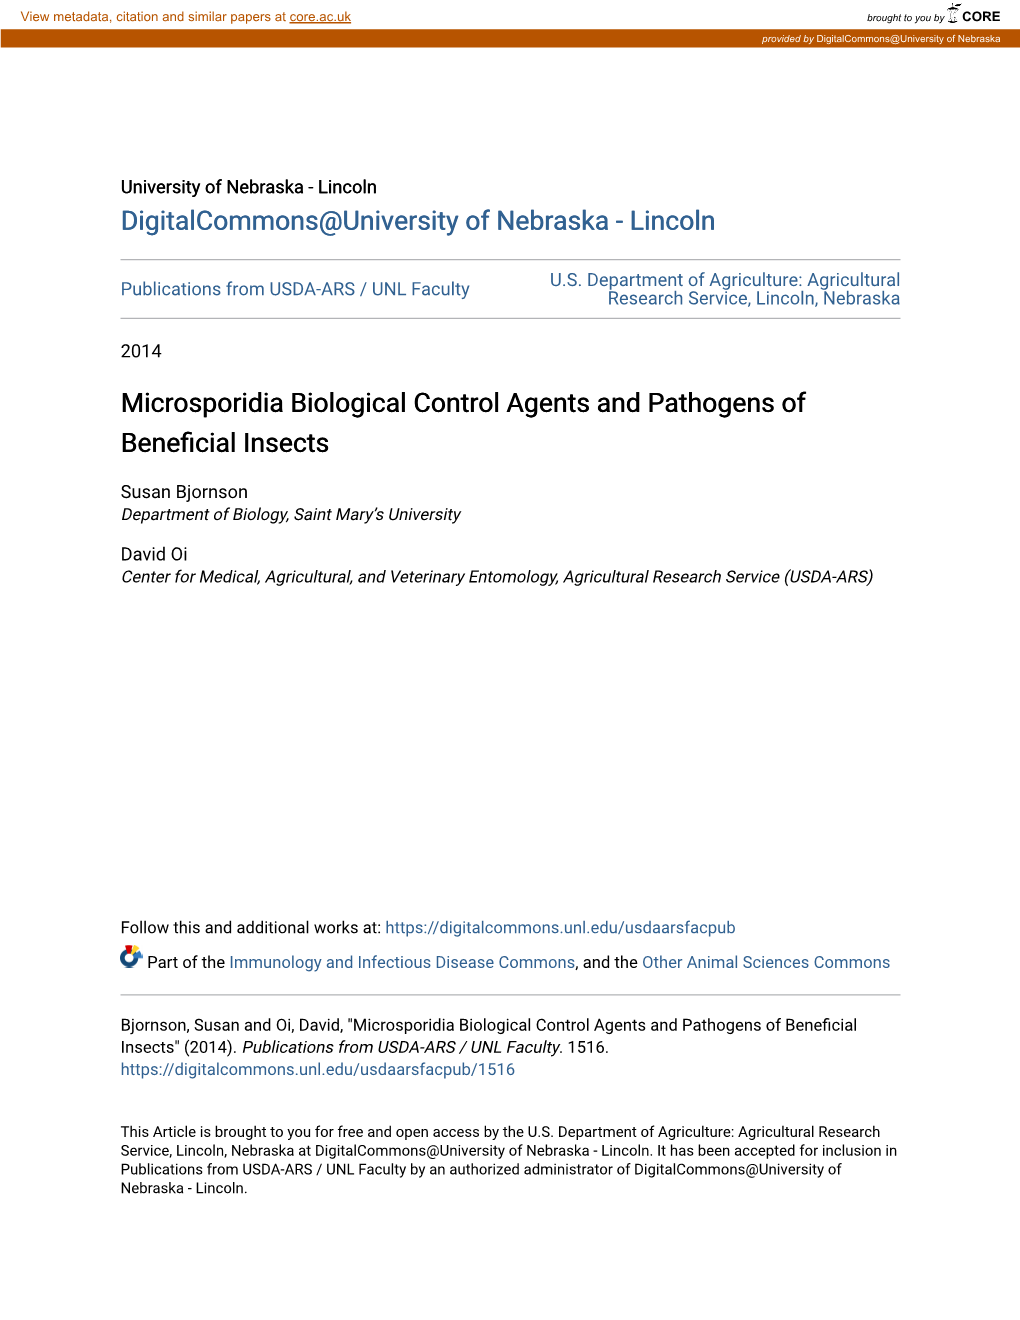 Microsporidia Biological Control Agents and Pathogens of Beneficial Insects